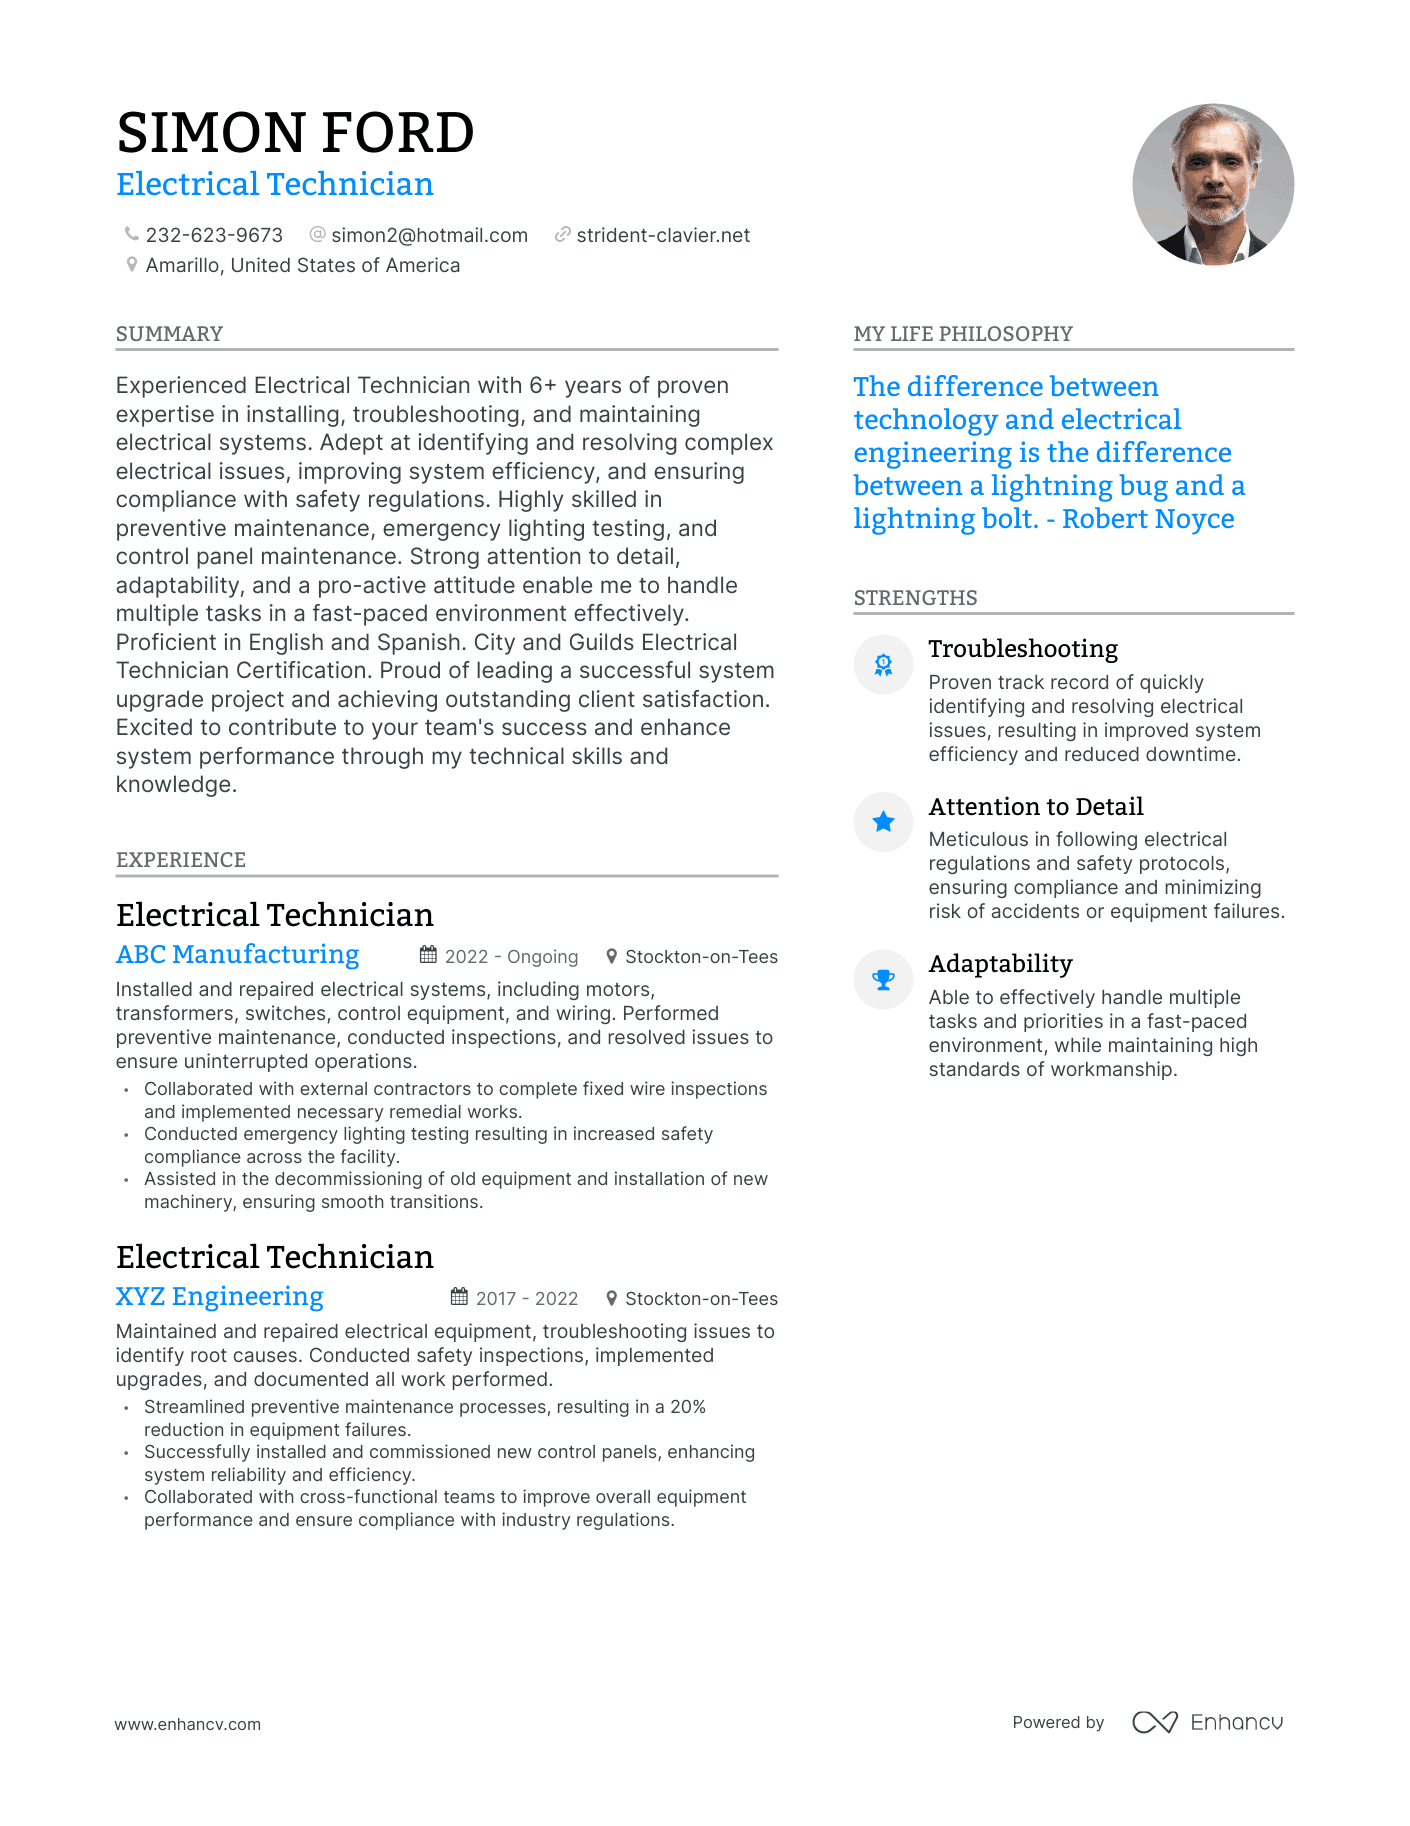 Electrical Technician resume example